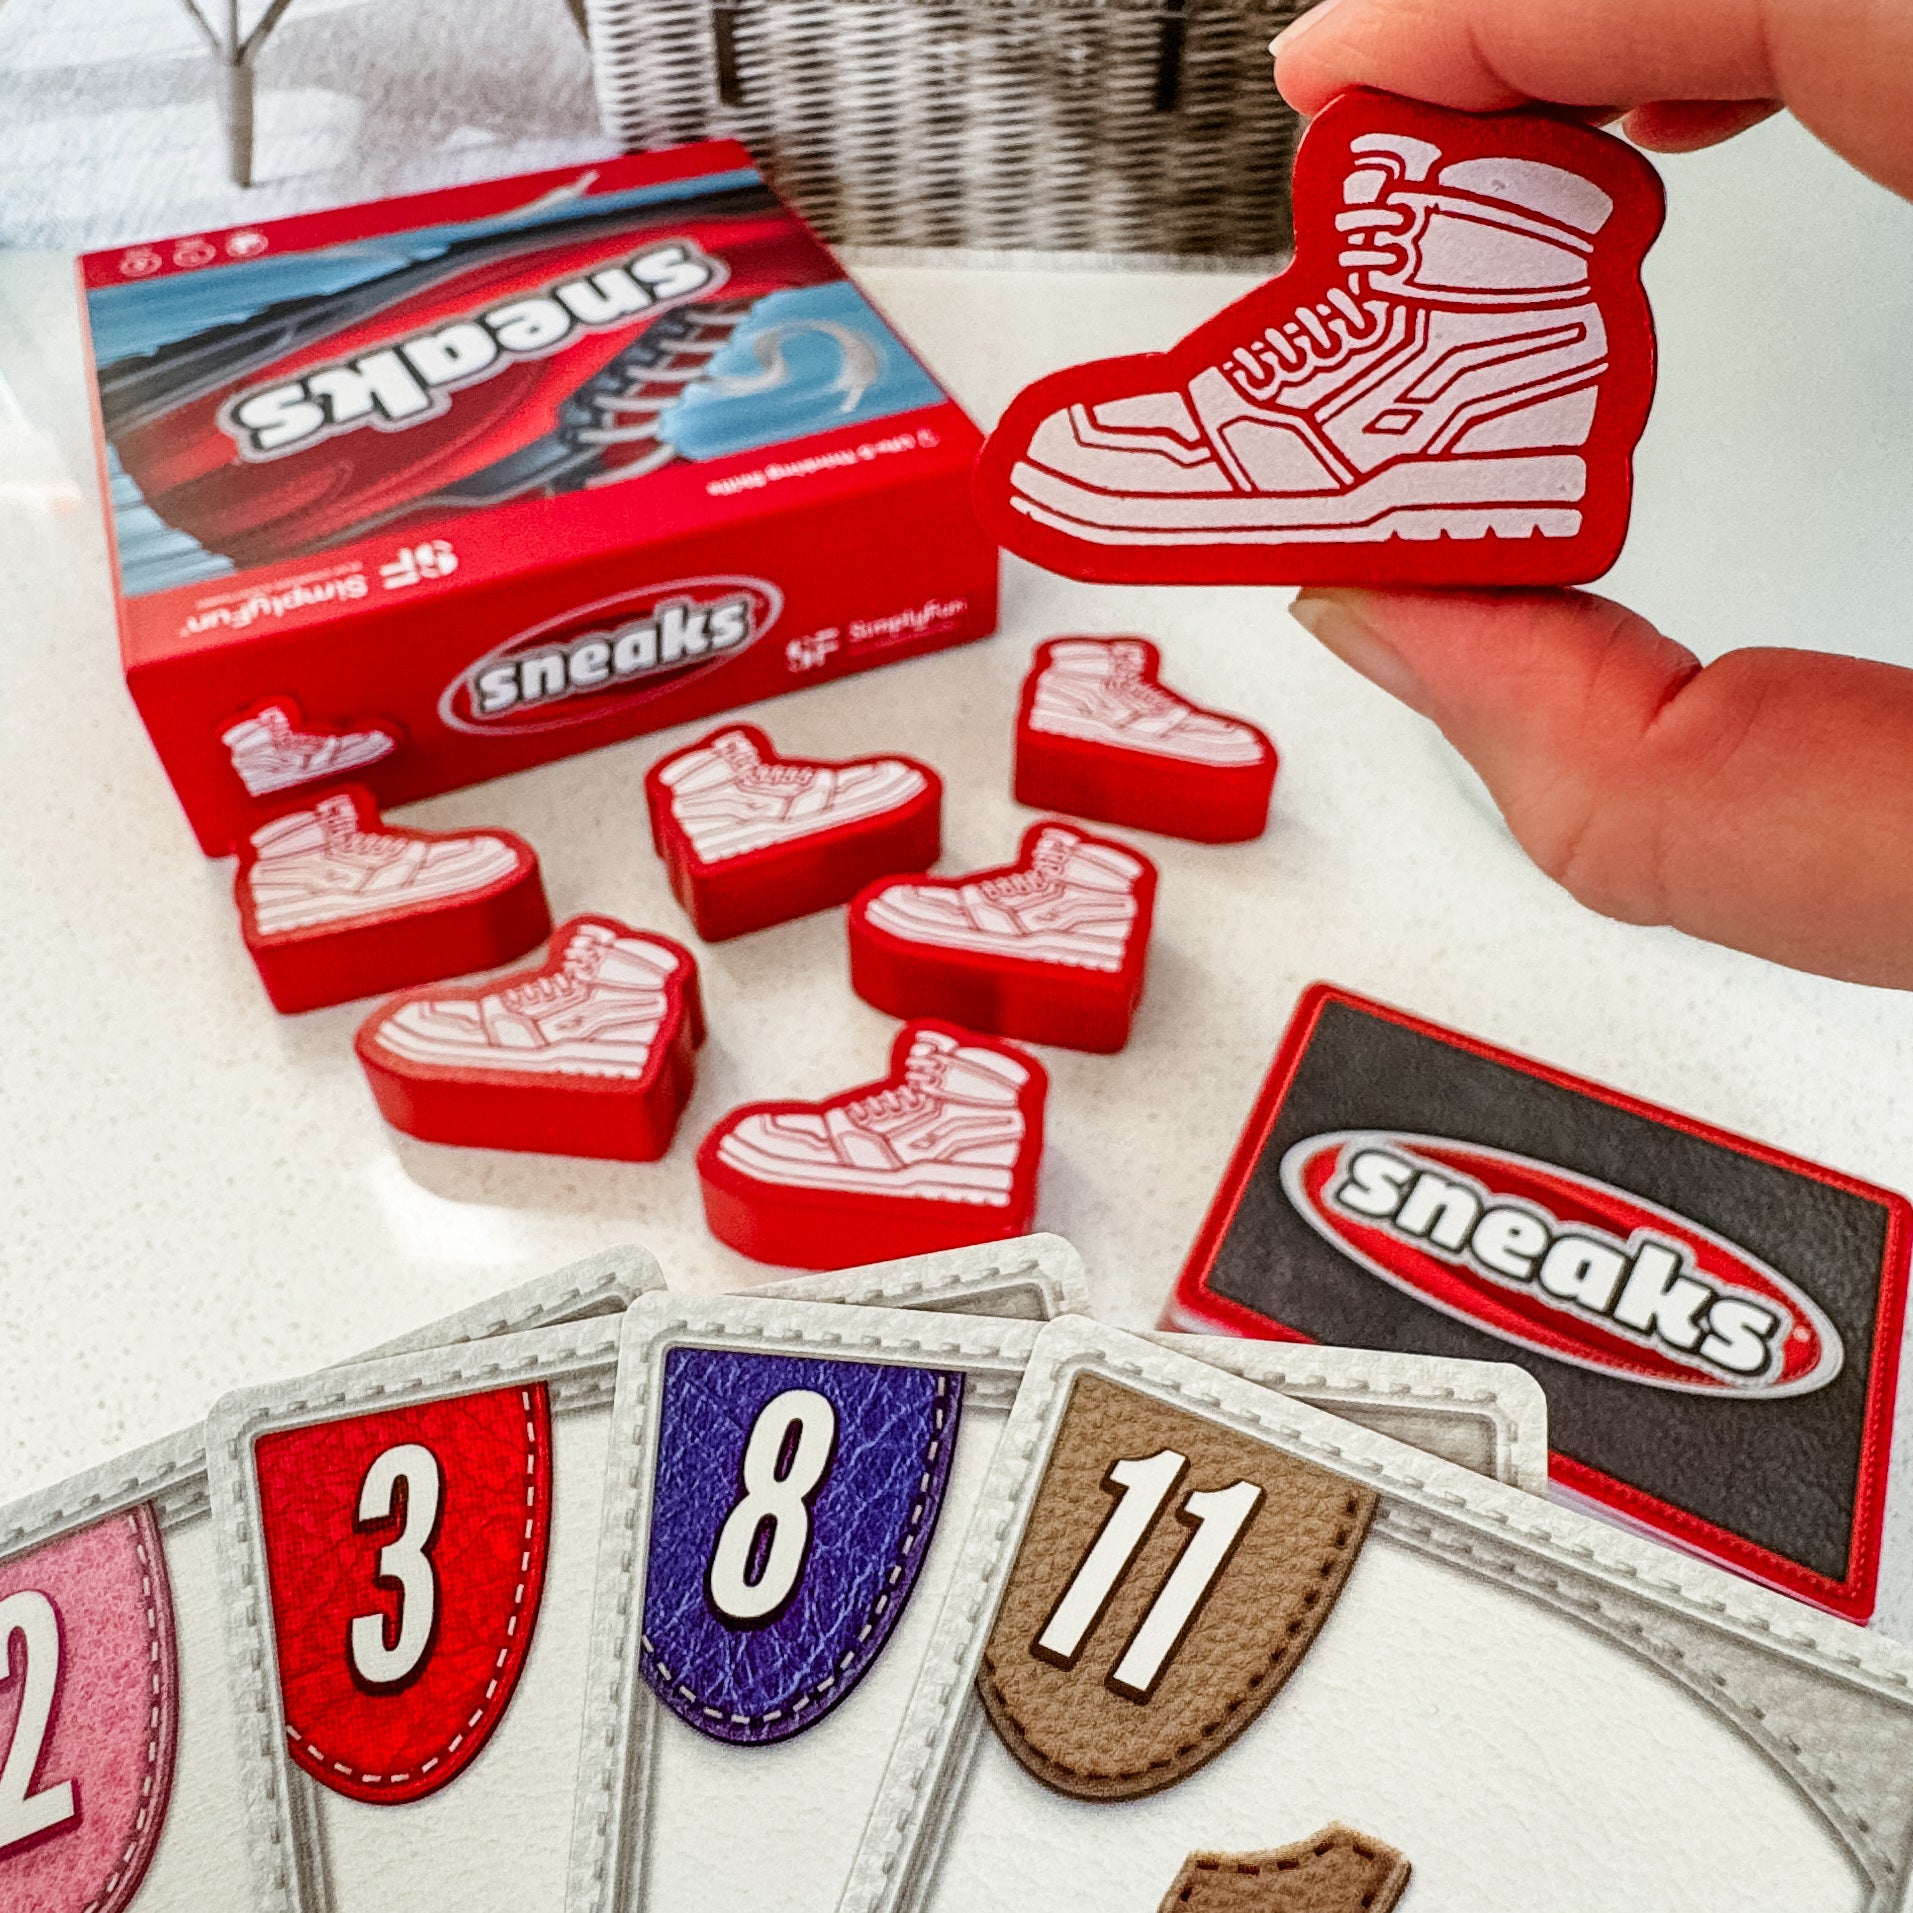 Think Quick in the Family-Fun Strategy Card Game, Sneaks!